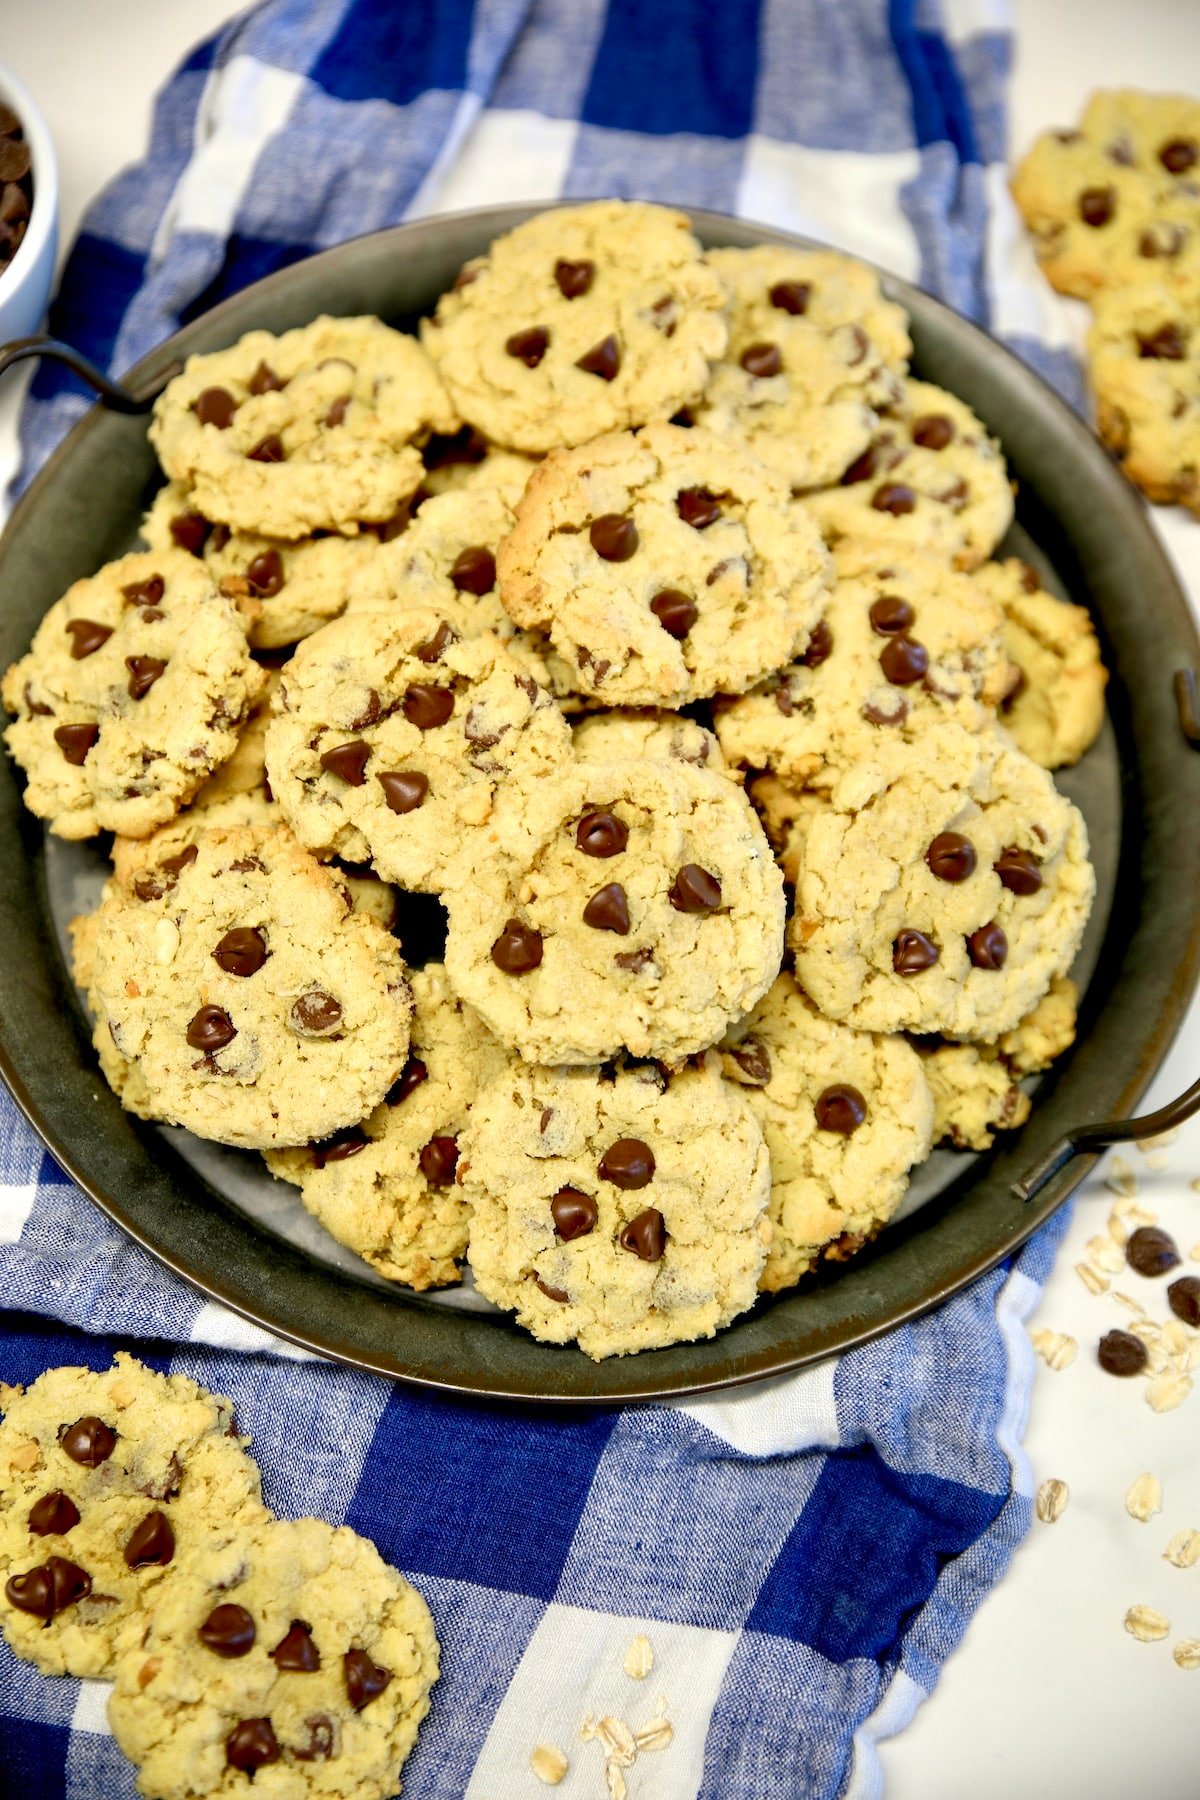 Plate of chocolate chip peanut butter cookies.